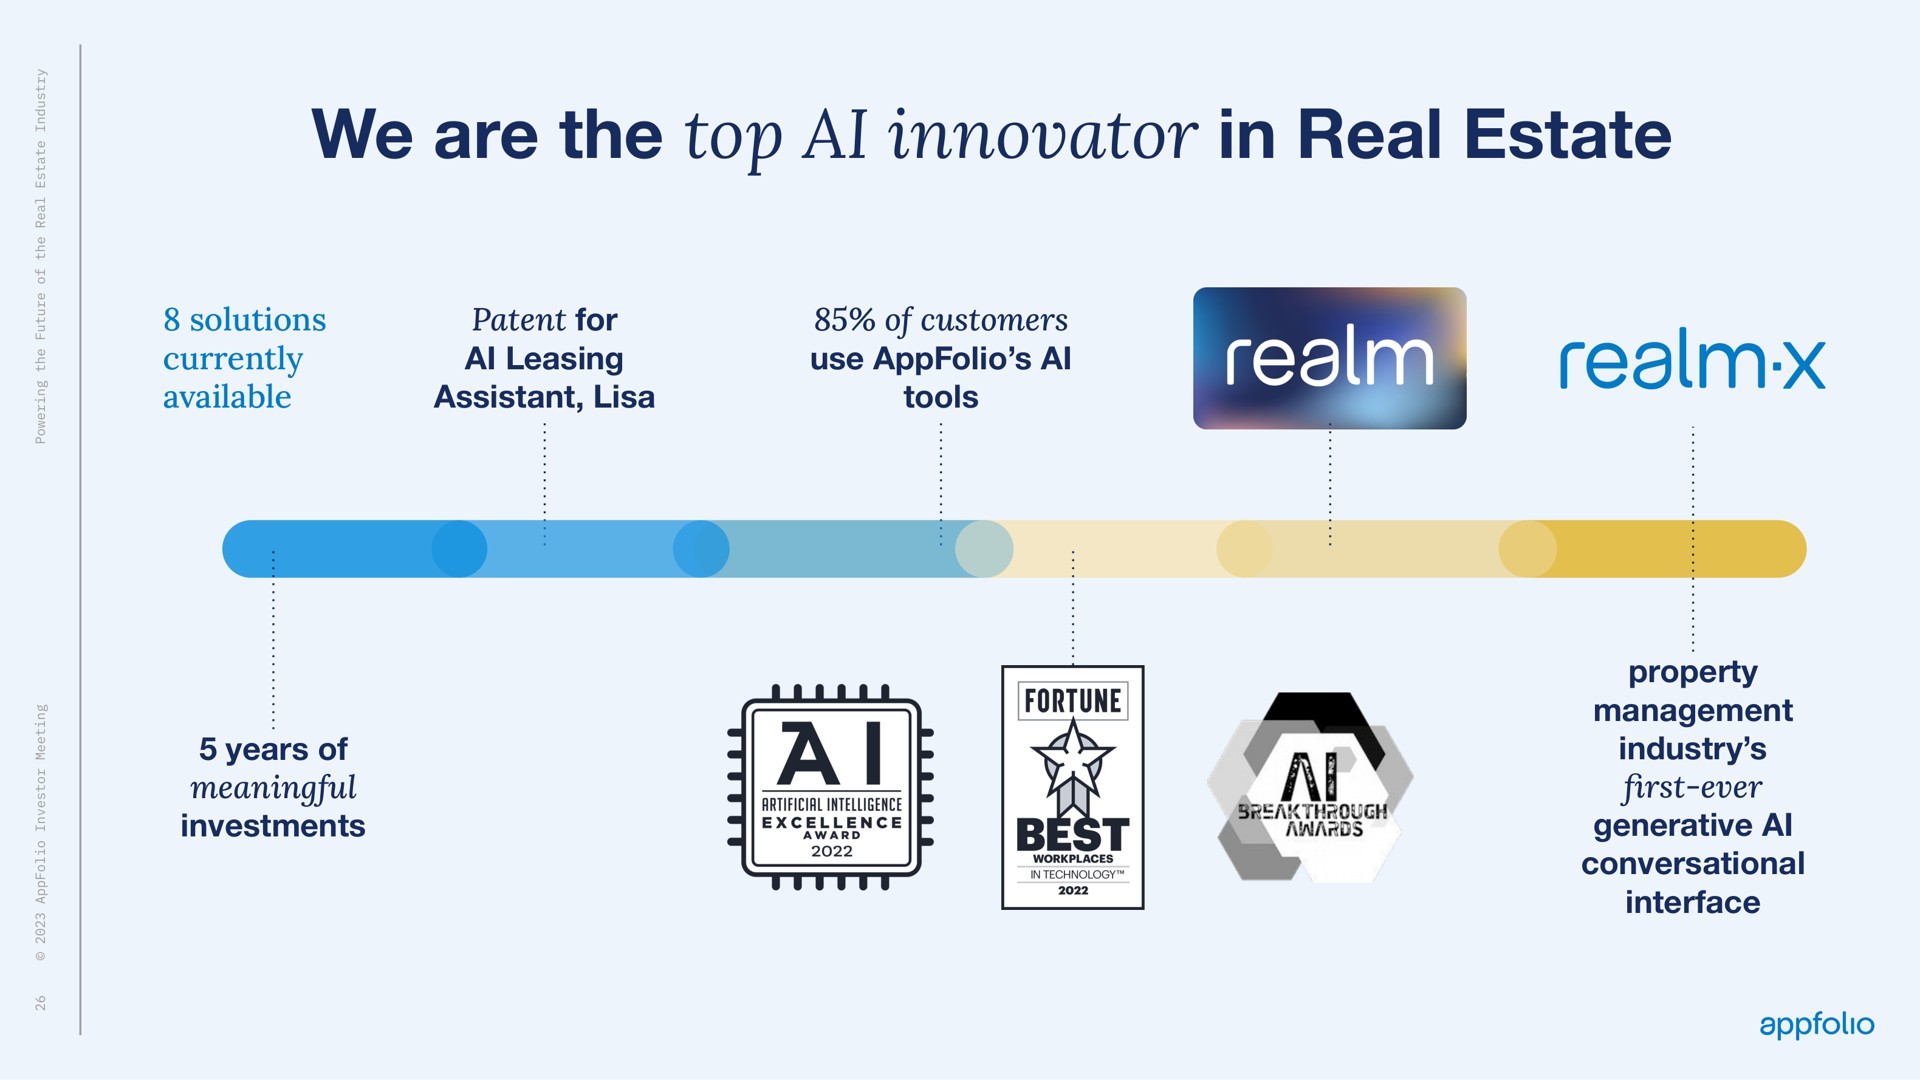 we are the top innovator in real estate realm | AppFolio